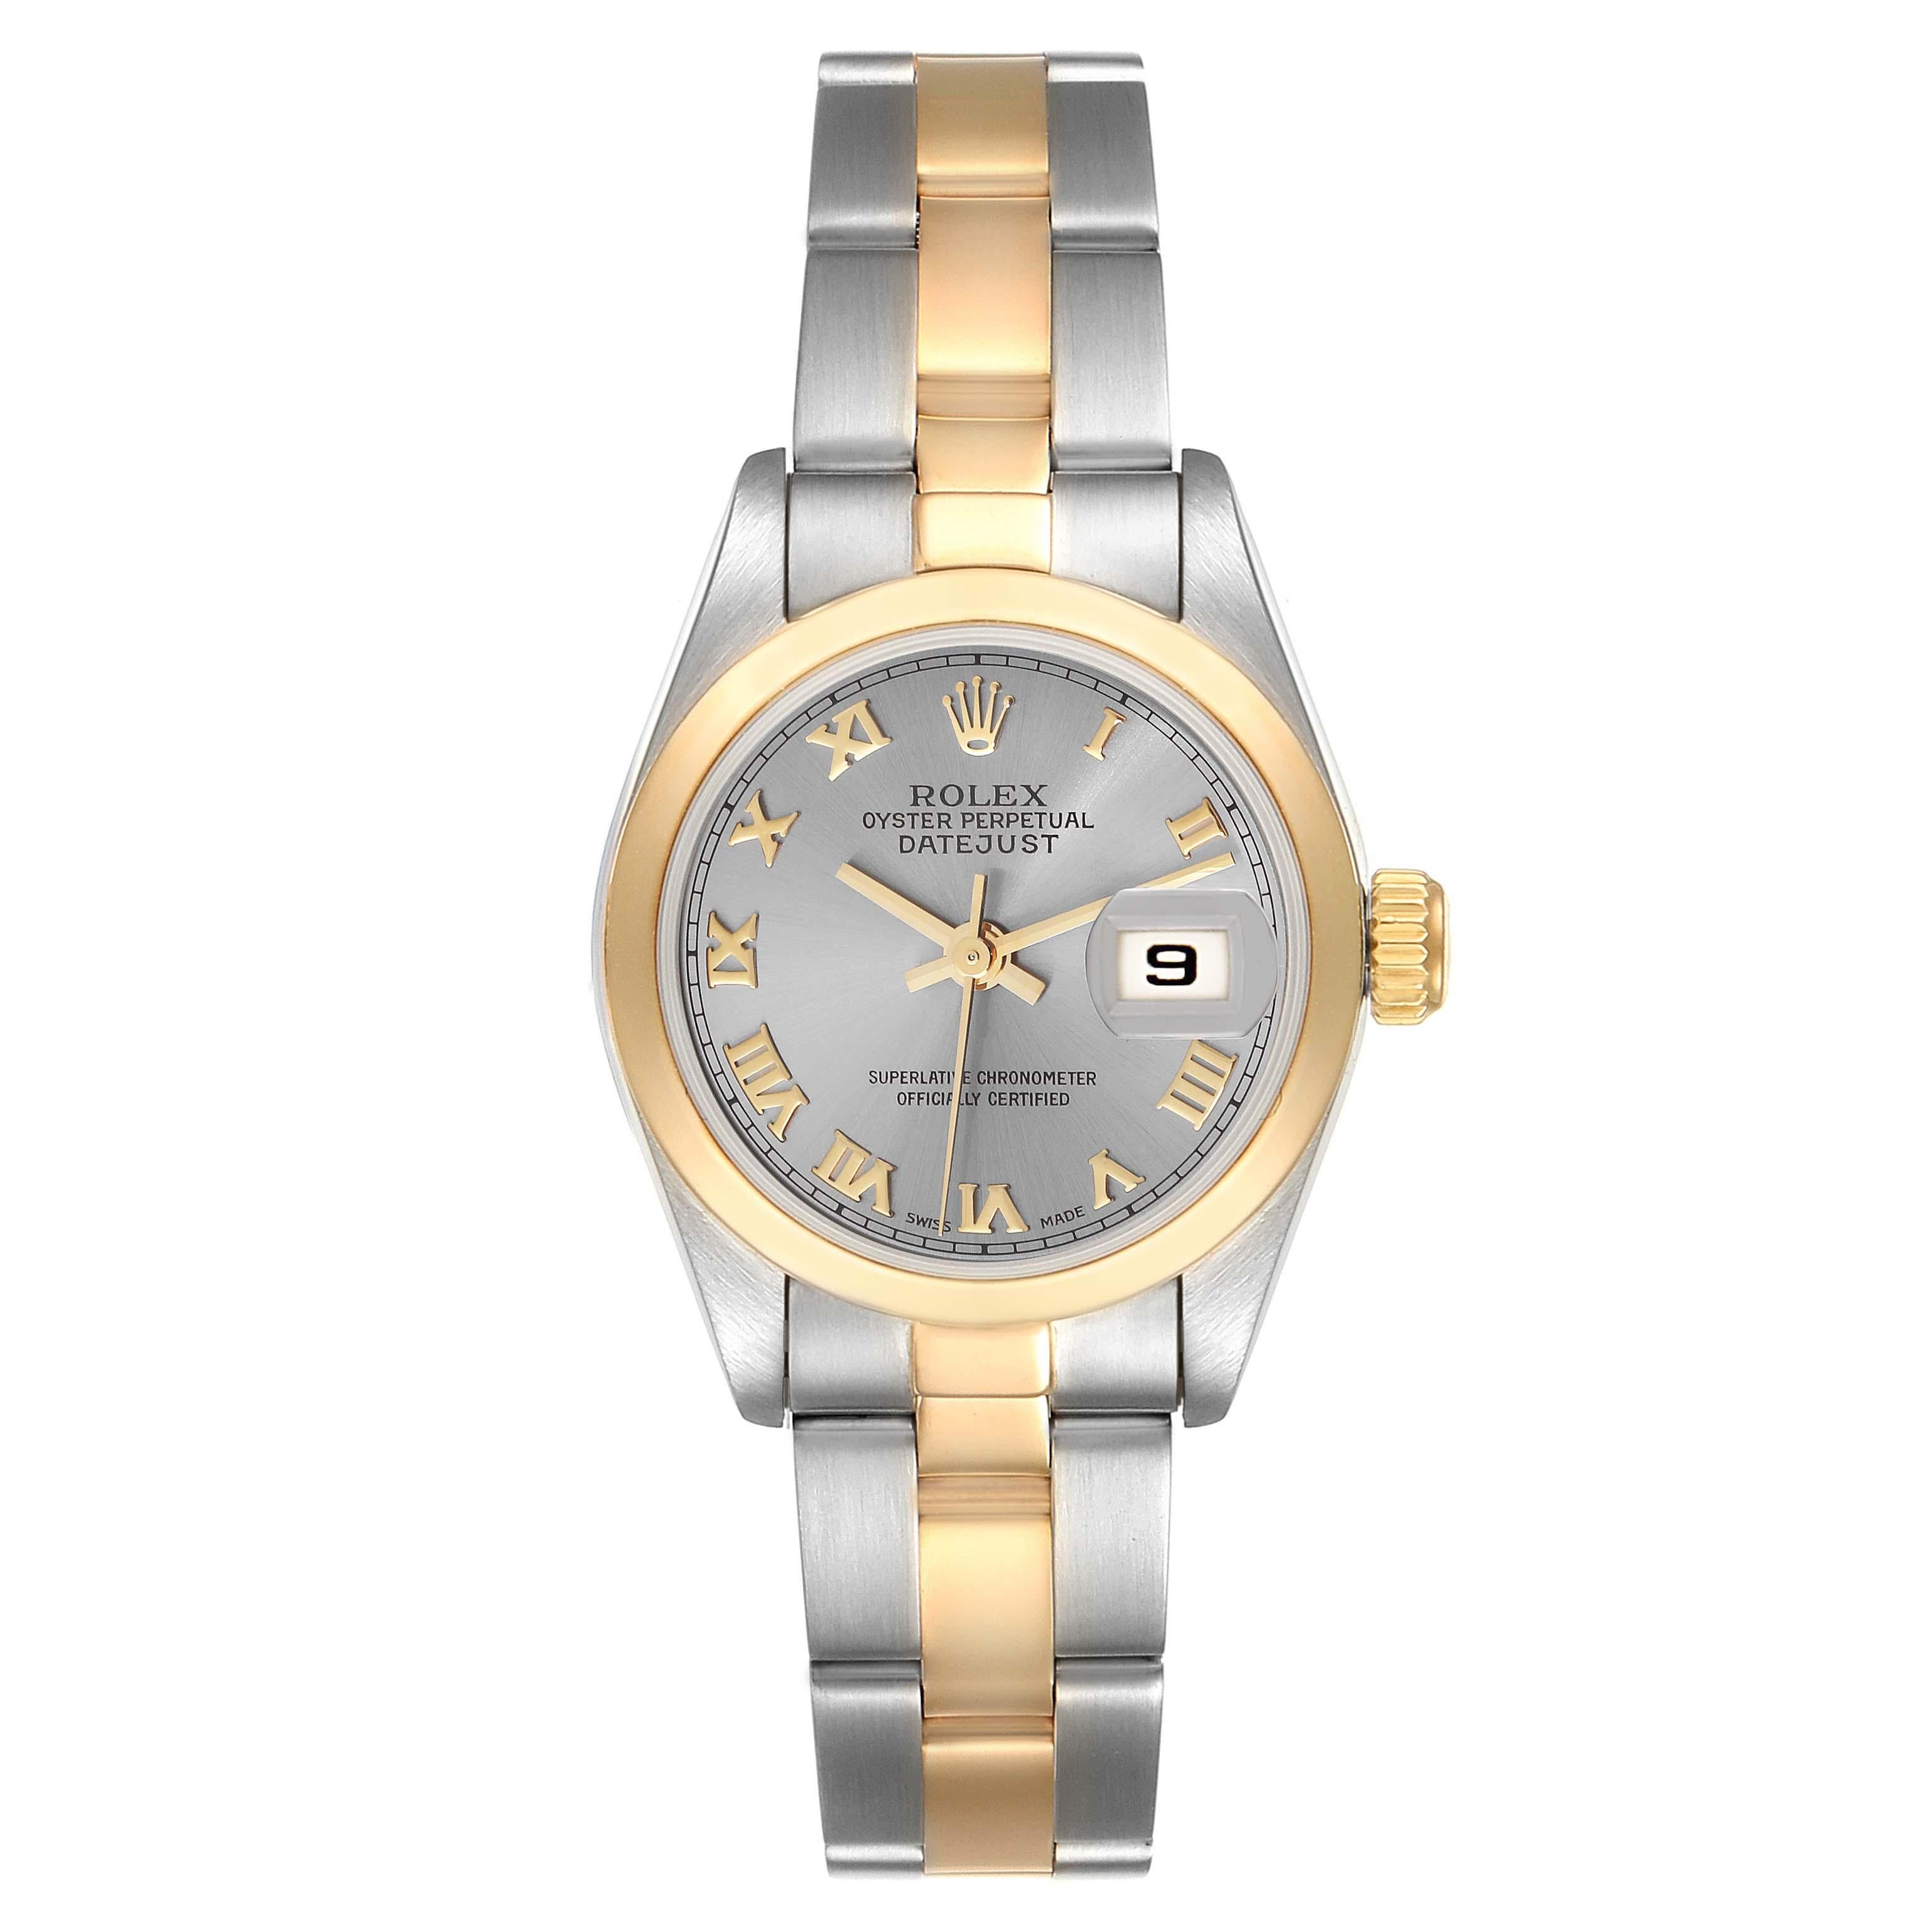 Rolex Datejust Steel Yellow Gold Slate Dial Ladies Watch 69163 Box Papers. Officially certified chronometer automatic self-winding movement. Stainless steel oyster case 26.0 mm in diameter. Rolex logo on the crown. 18k yellow gold smooth bezel.